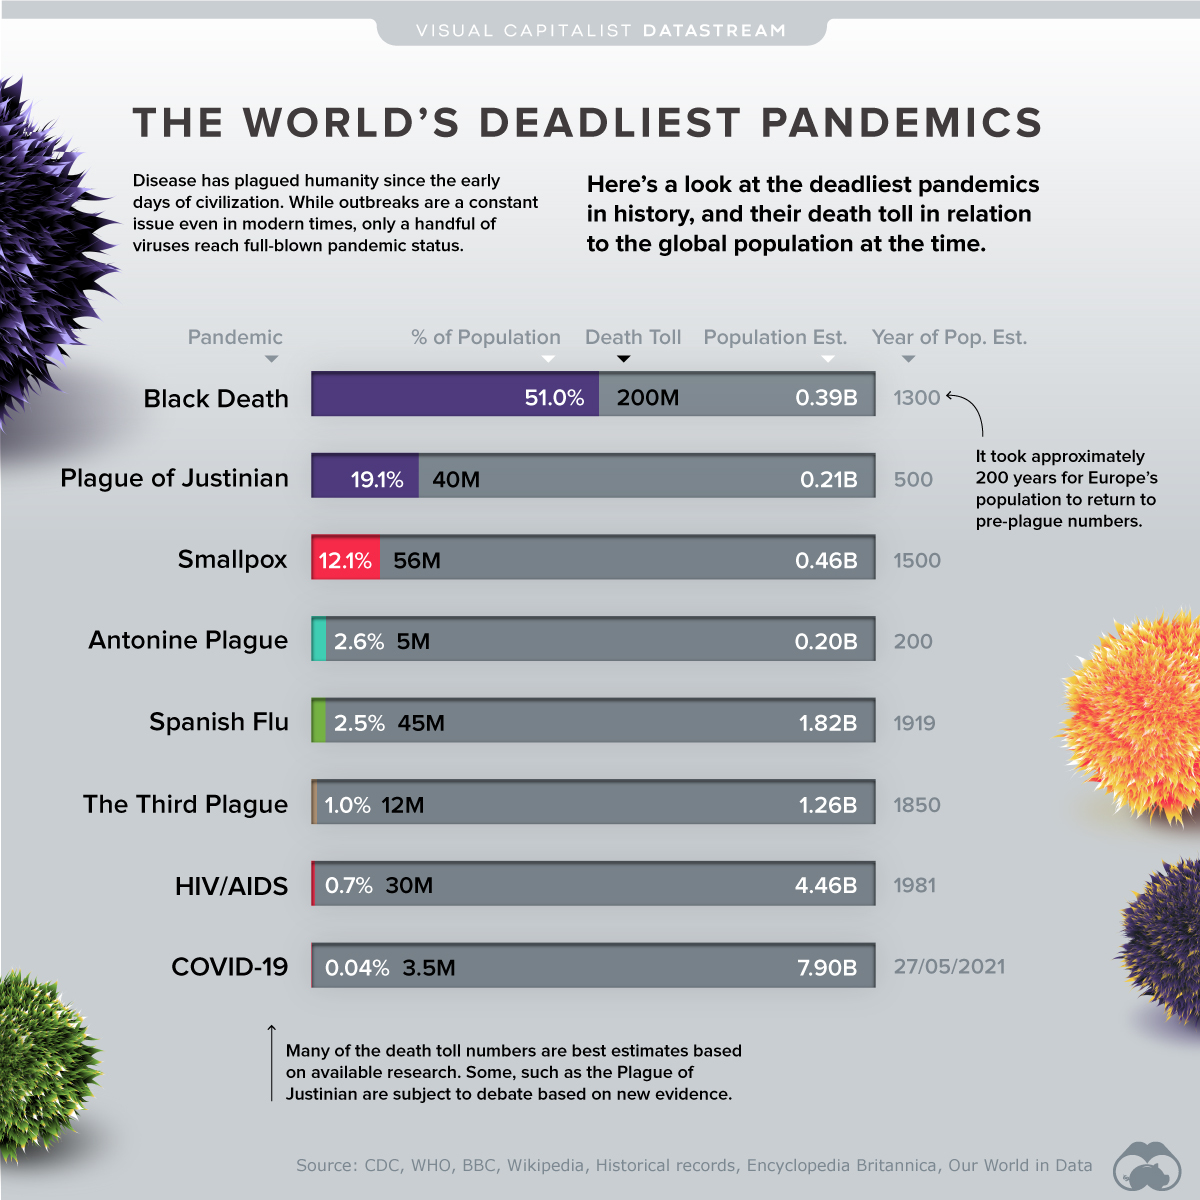 Visualizing the World’s Deadliest Pandemics by Population Impact